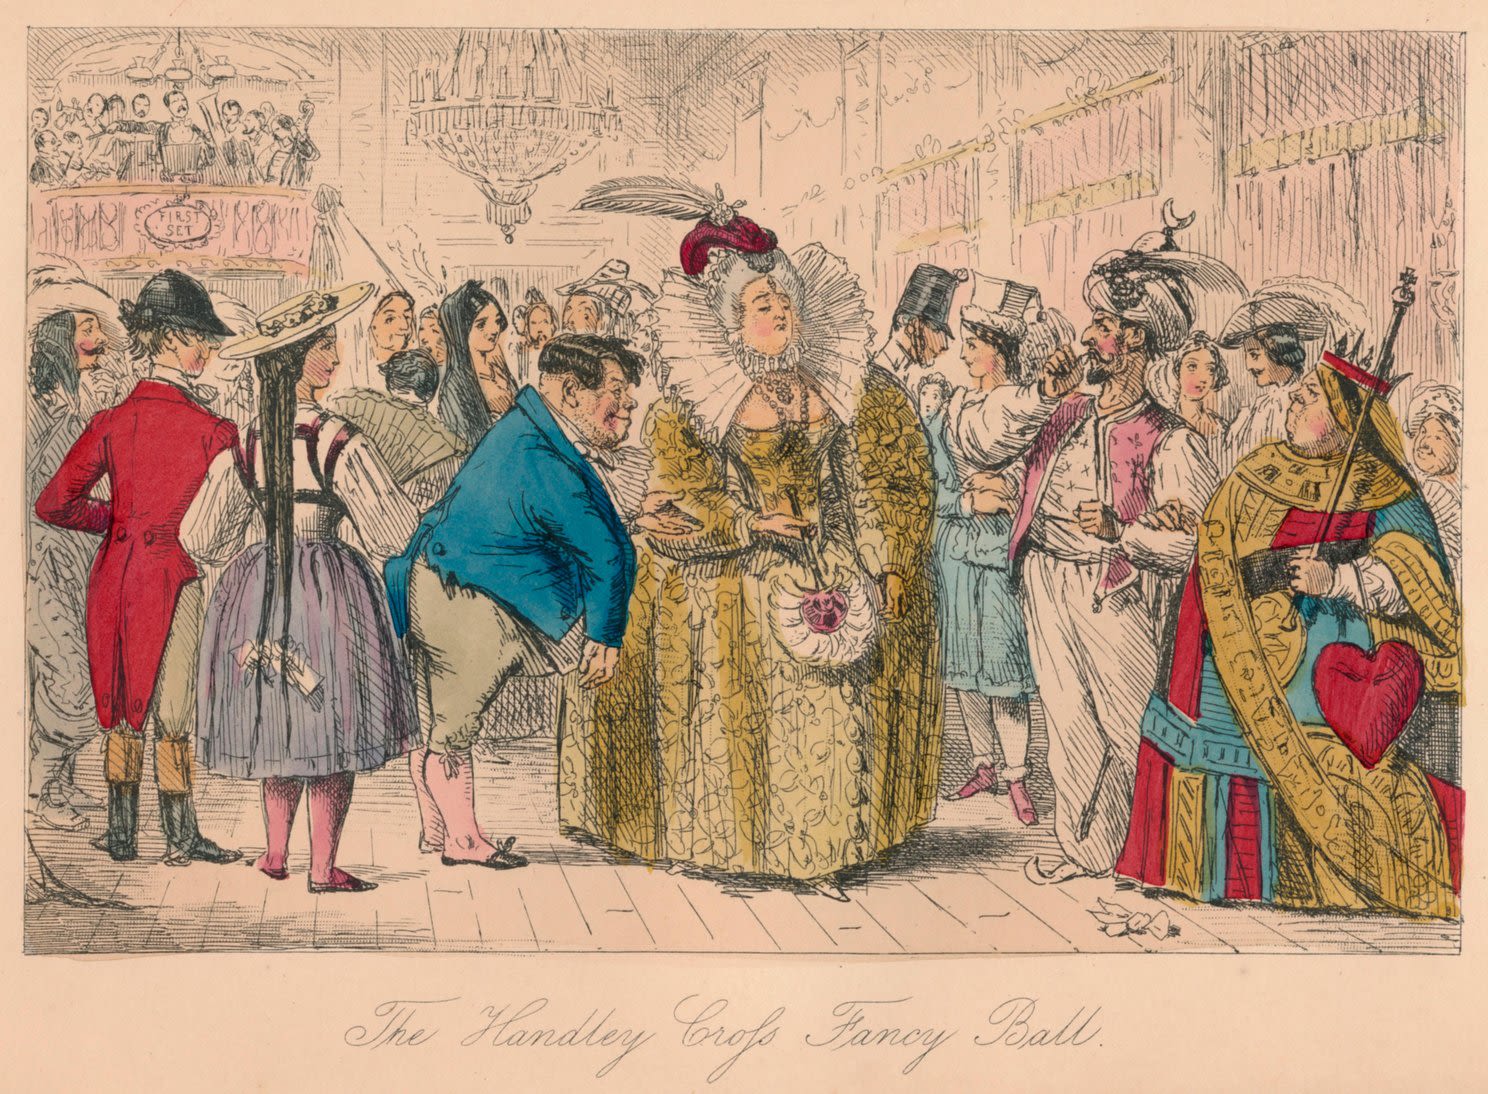 ☕ Choose a Drink for Each of These Unique Scenarios and We’ll Guess Your Age The Handley Cross Fancy Ball, 1854, John Leech